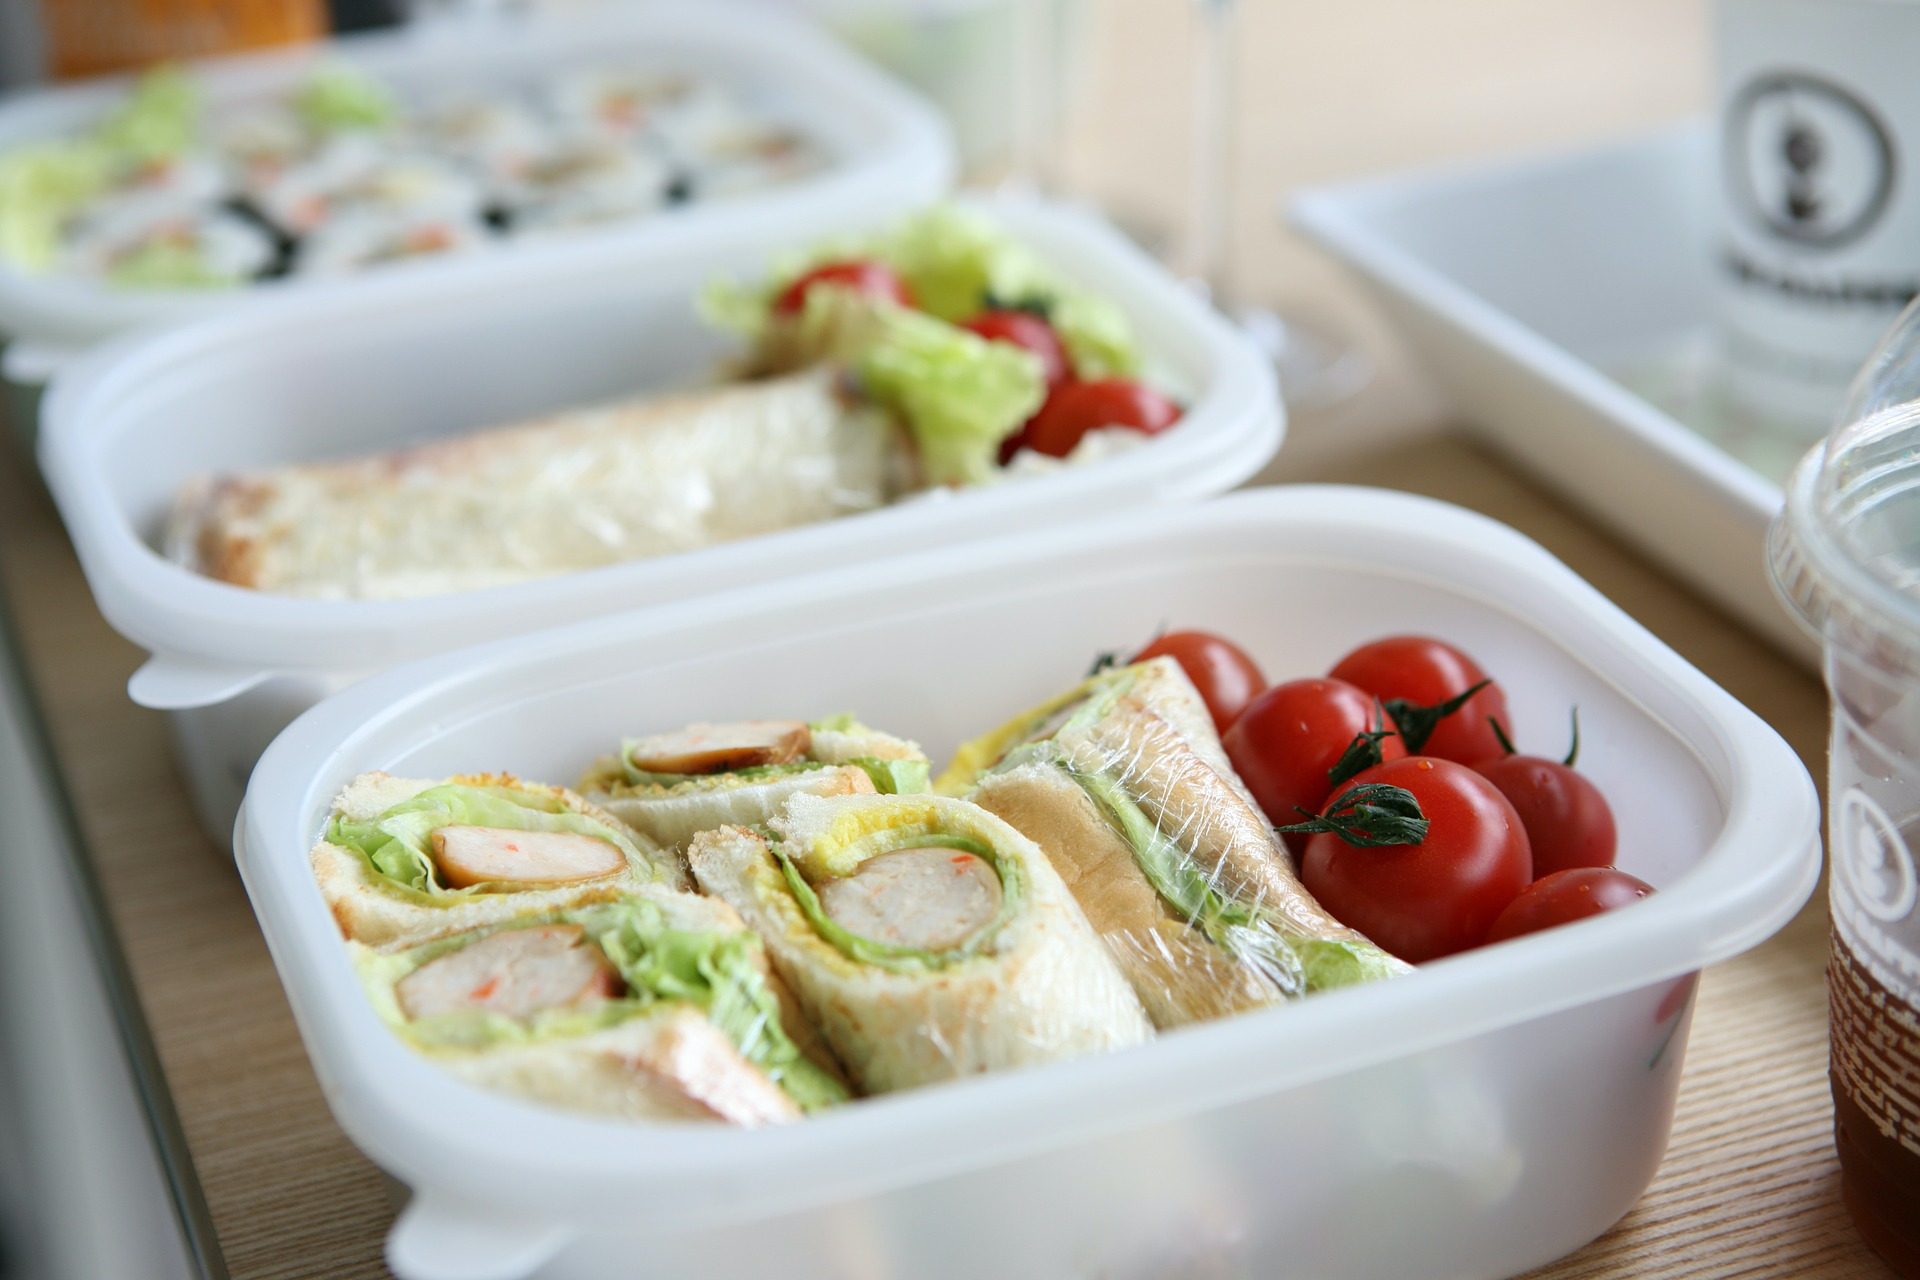 Is Packing Lunch Really Better Than Eating Out?